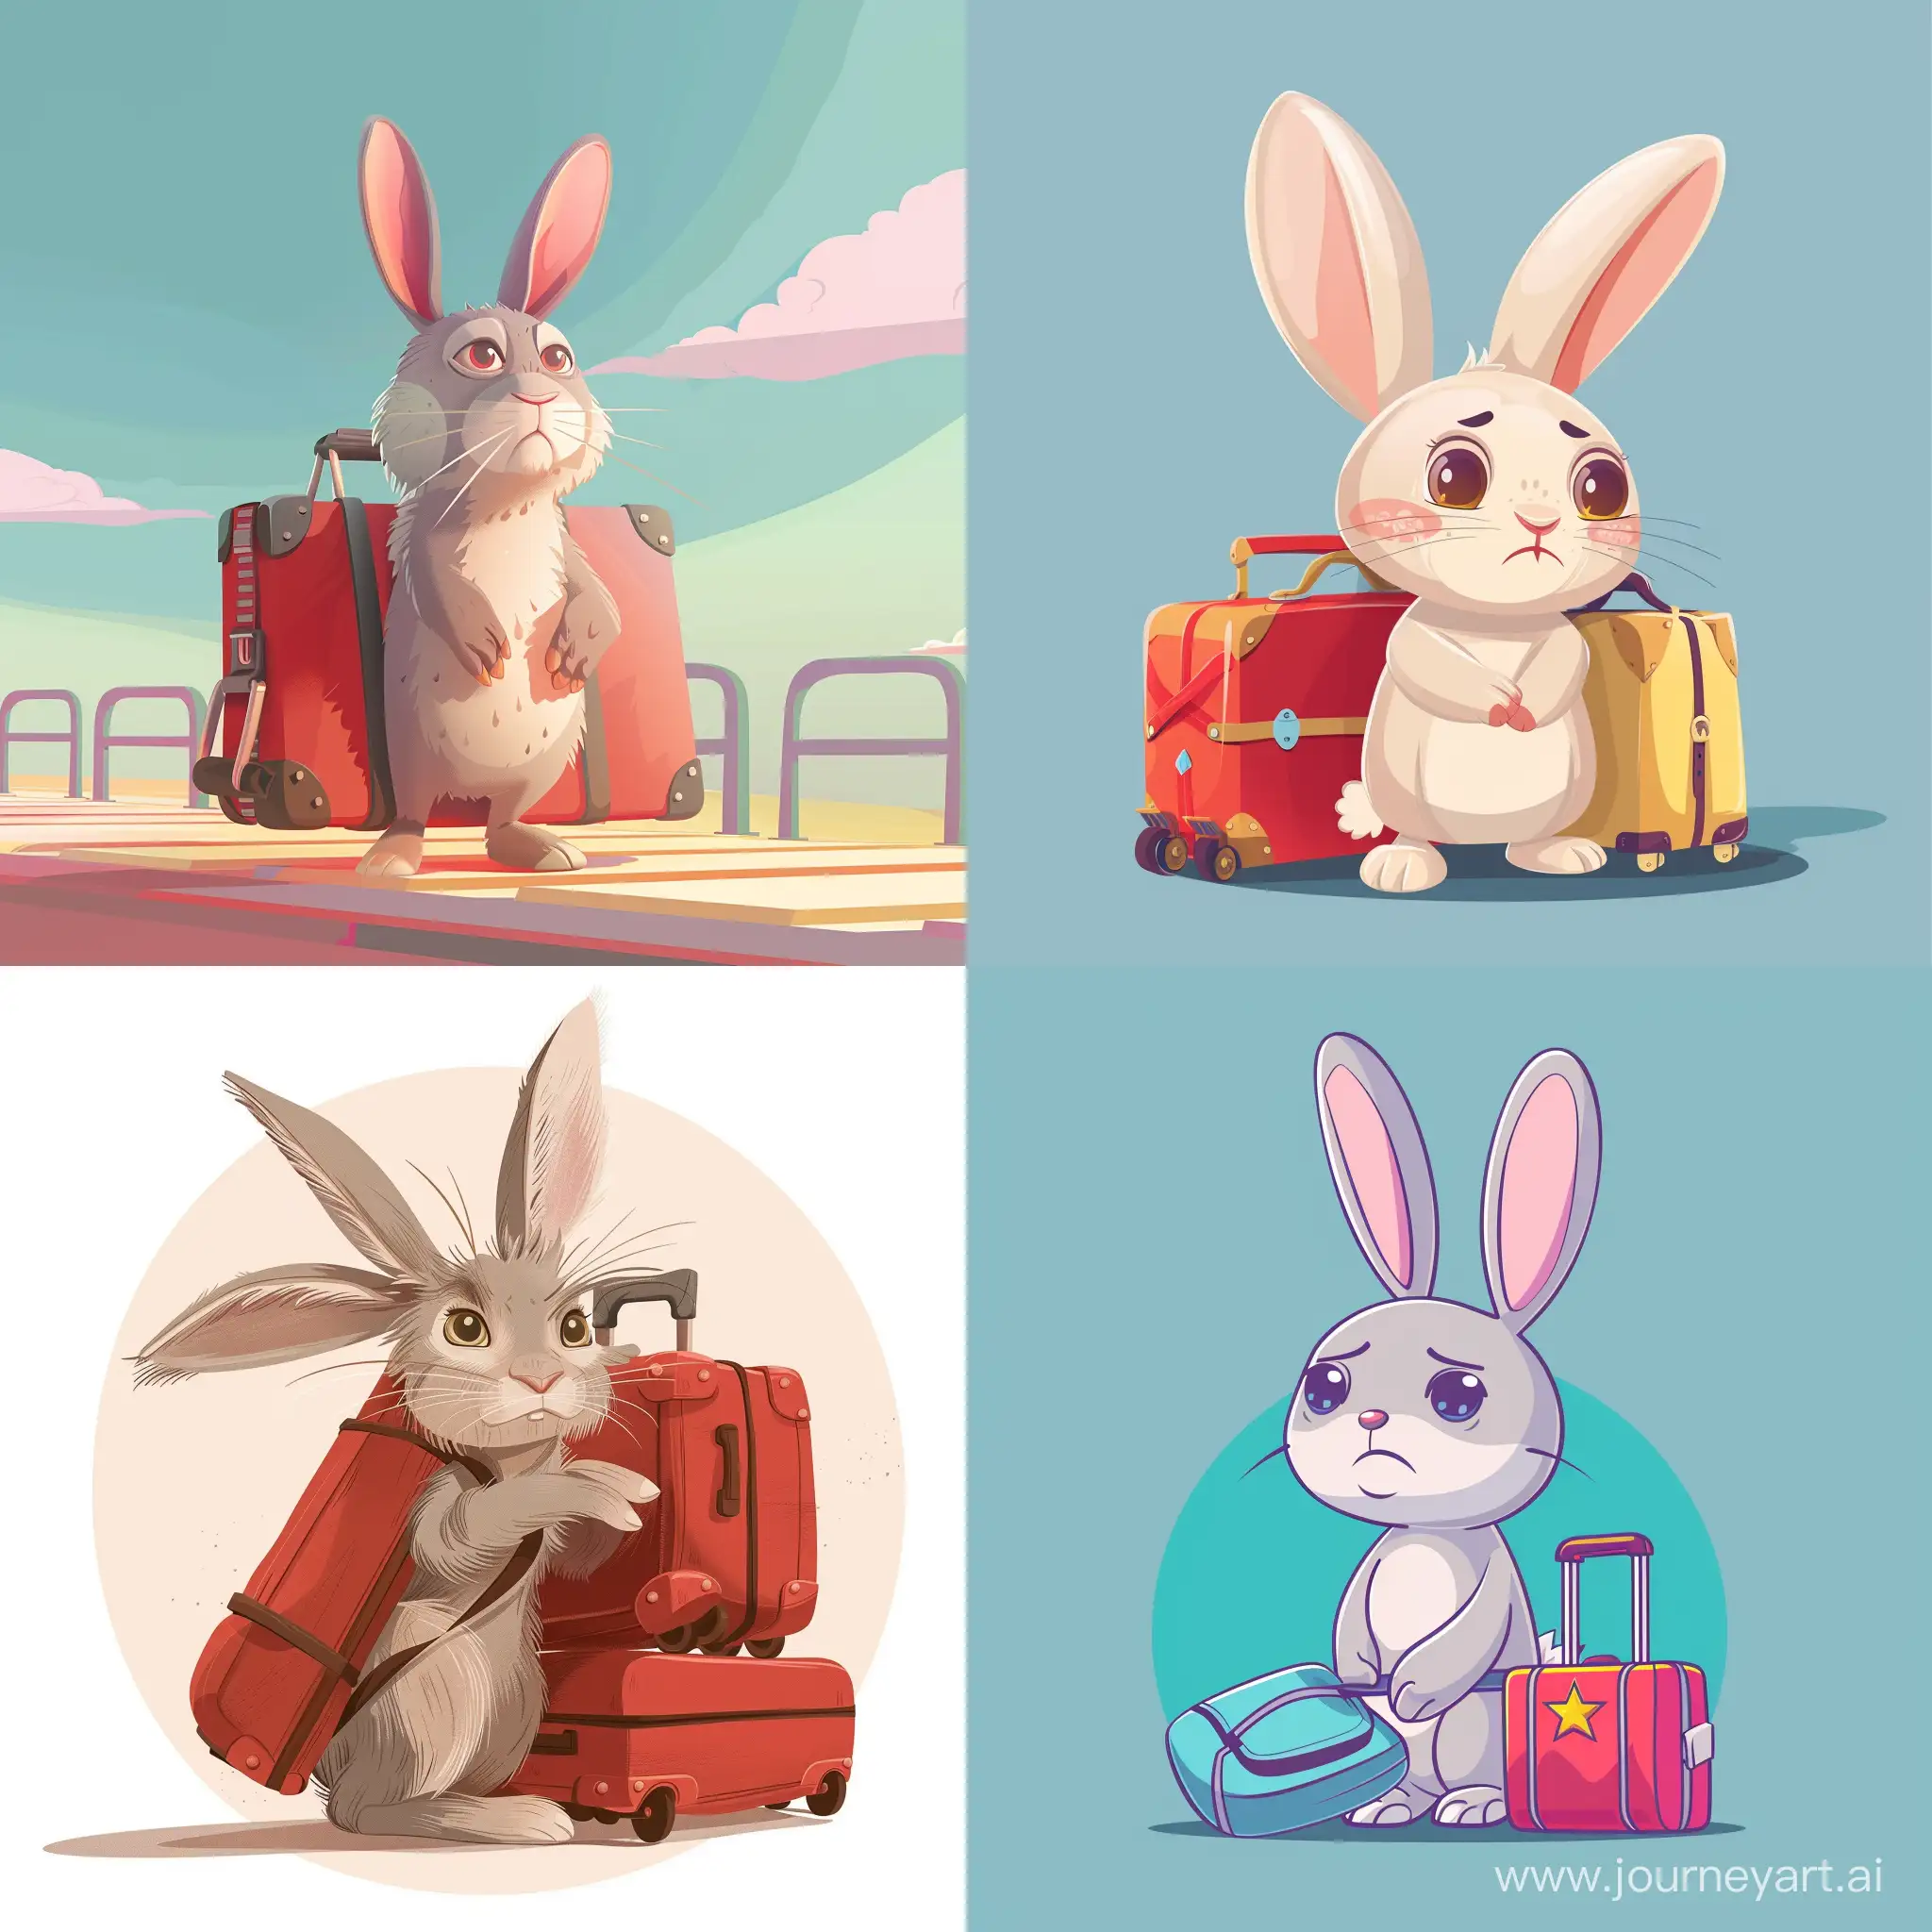 Lonely-Rabbit-Departing-with-Baggage-Emotional-Cartoon-Illustration